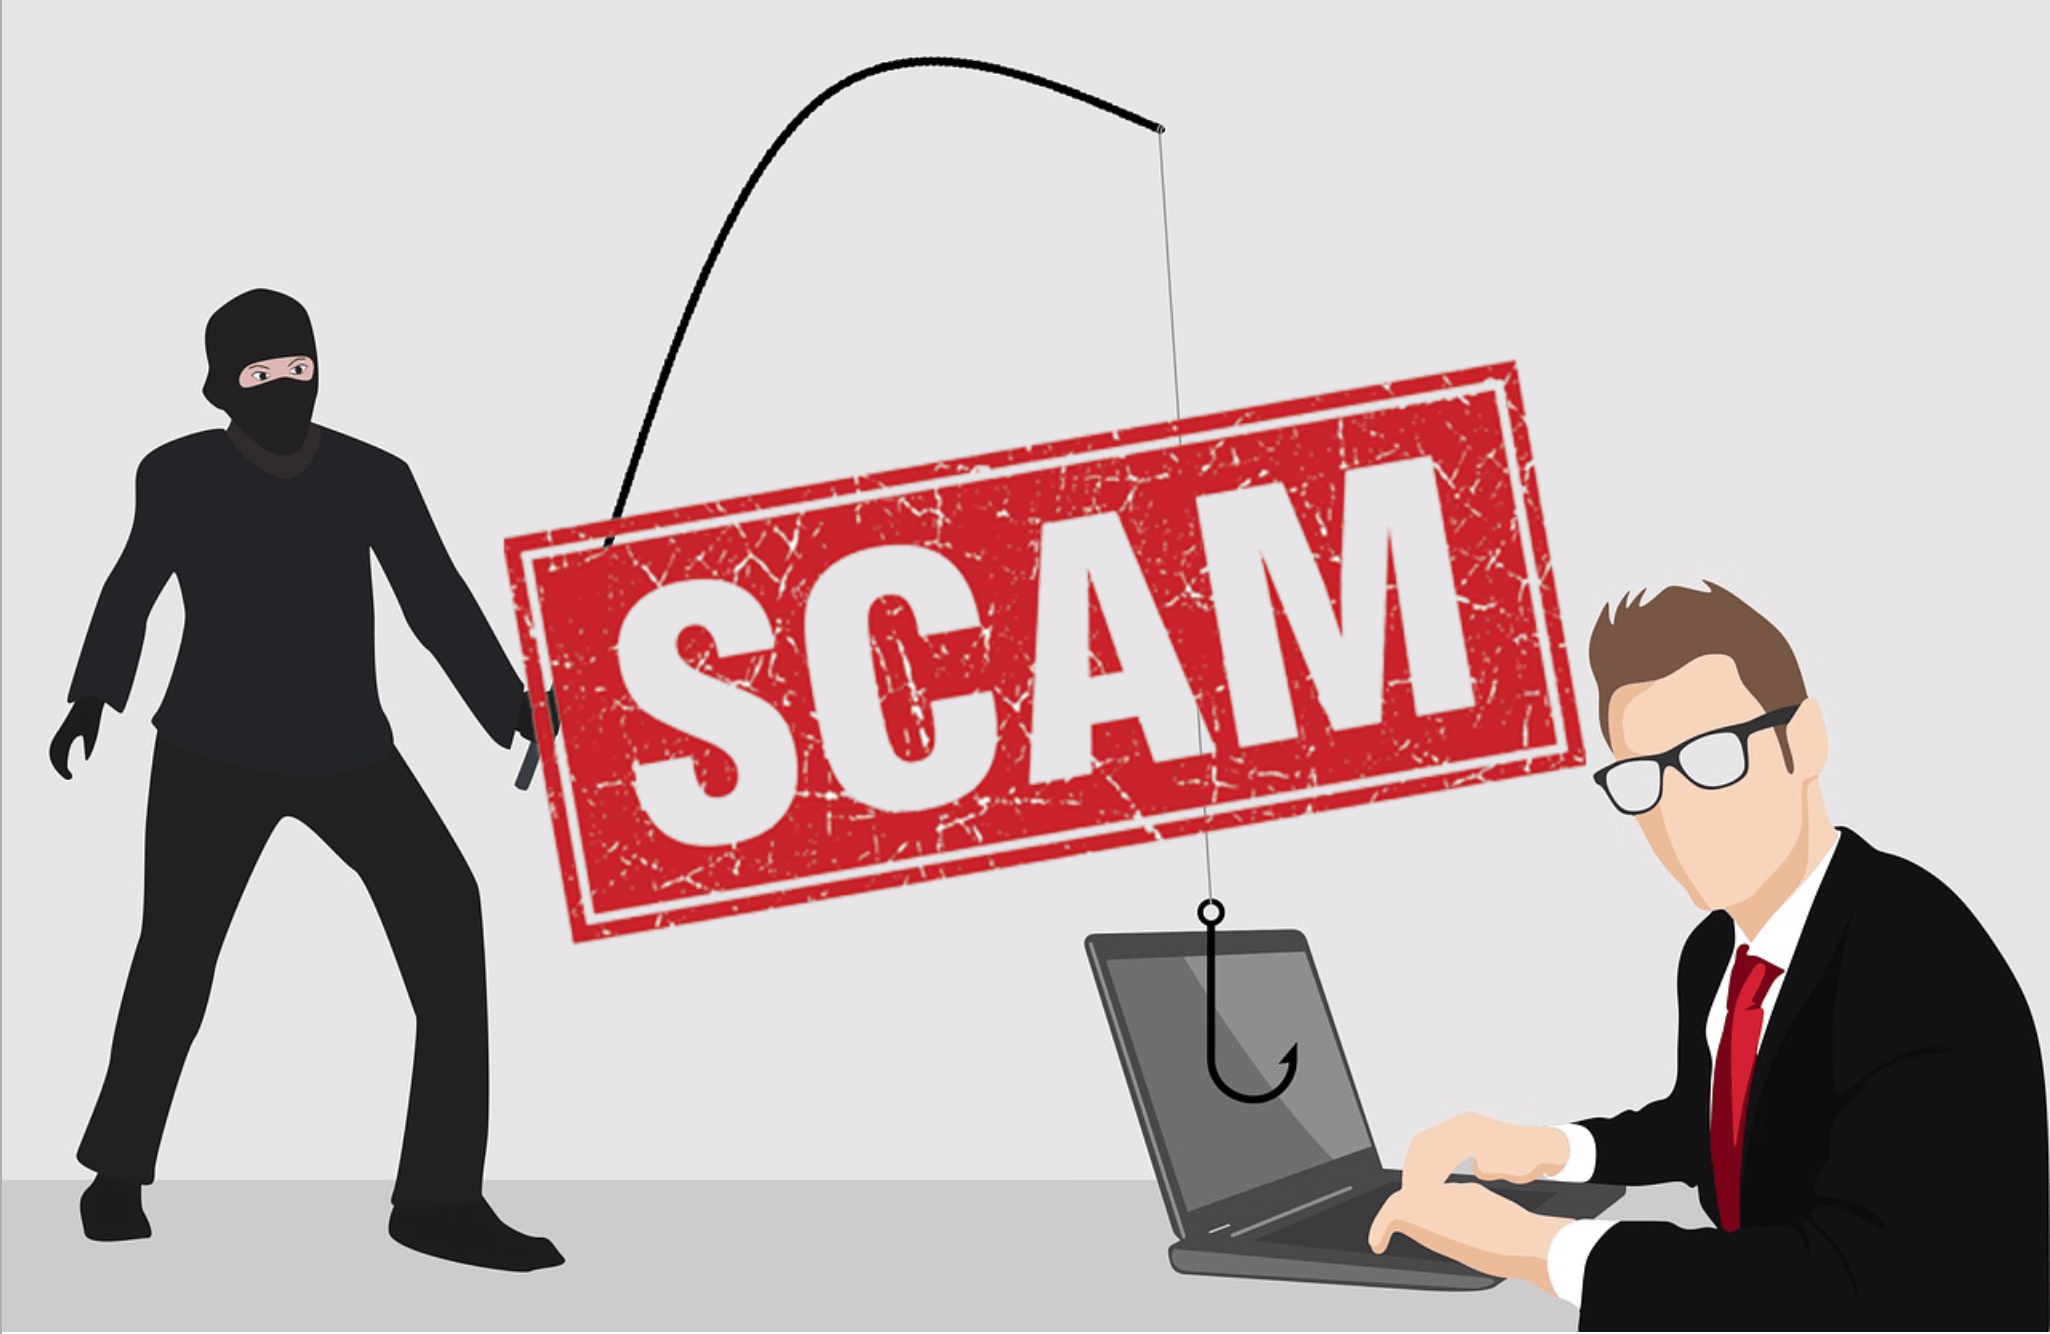 Beware of Online Scams and Deception